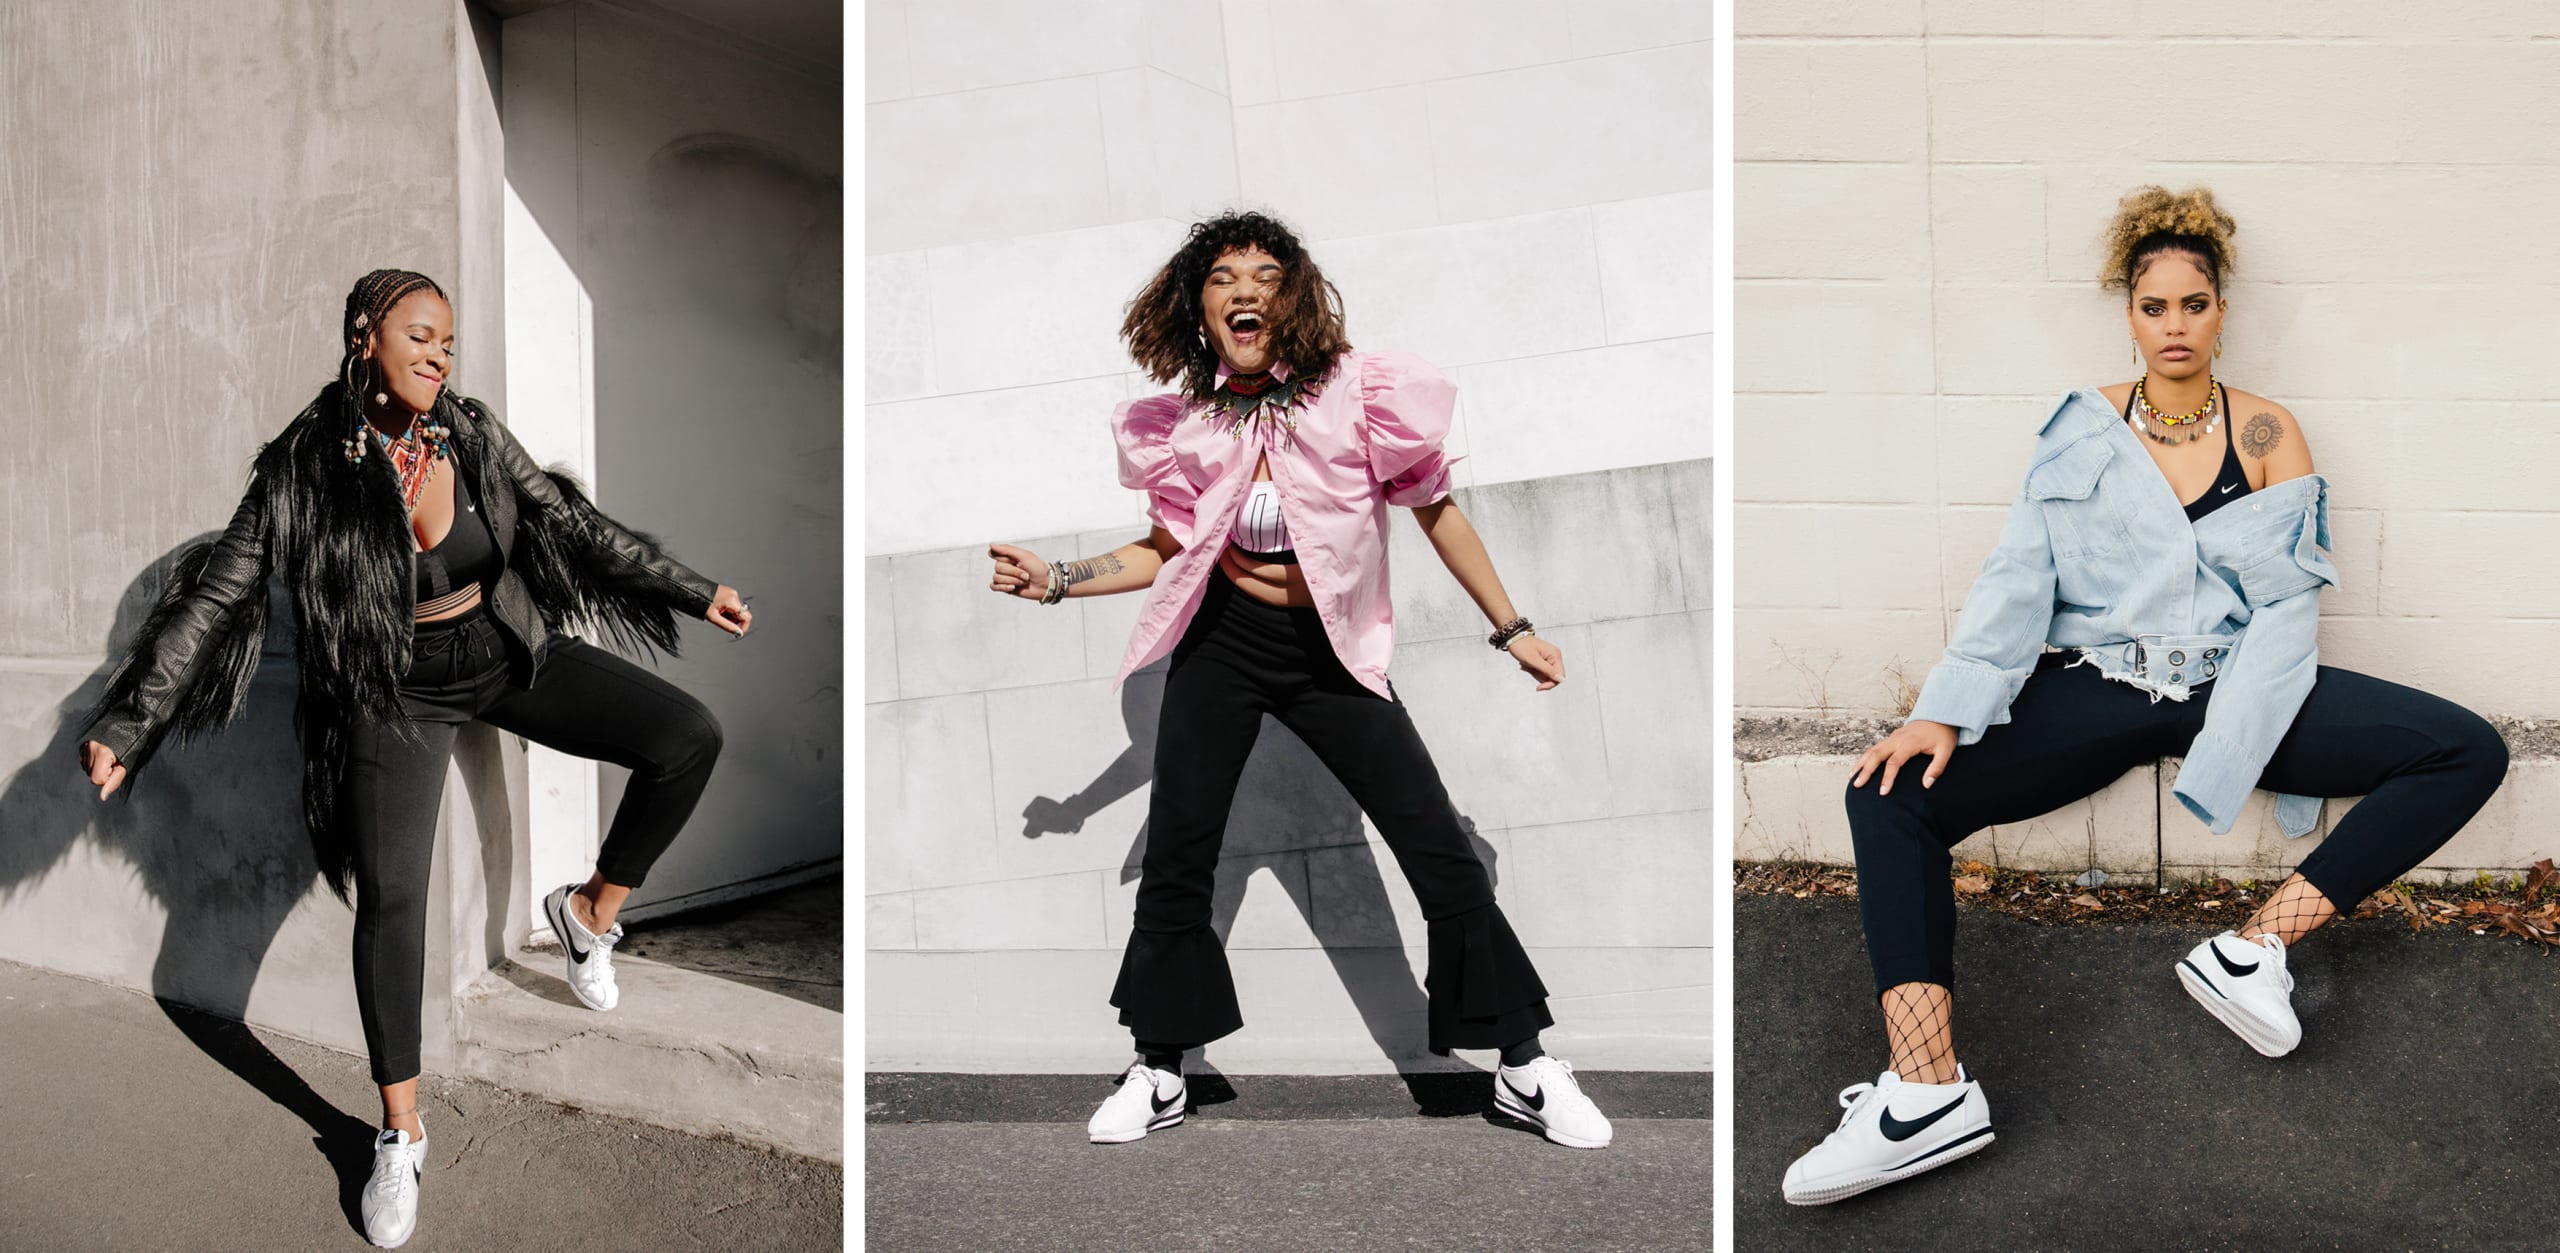 Encogimiento Aniquilar Real Nike delves into zines to celebrate the Cortez, flaunts social media stars  in street style photography - stoppress.co.nz